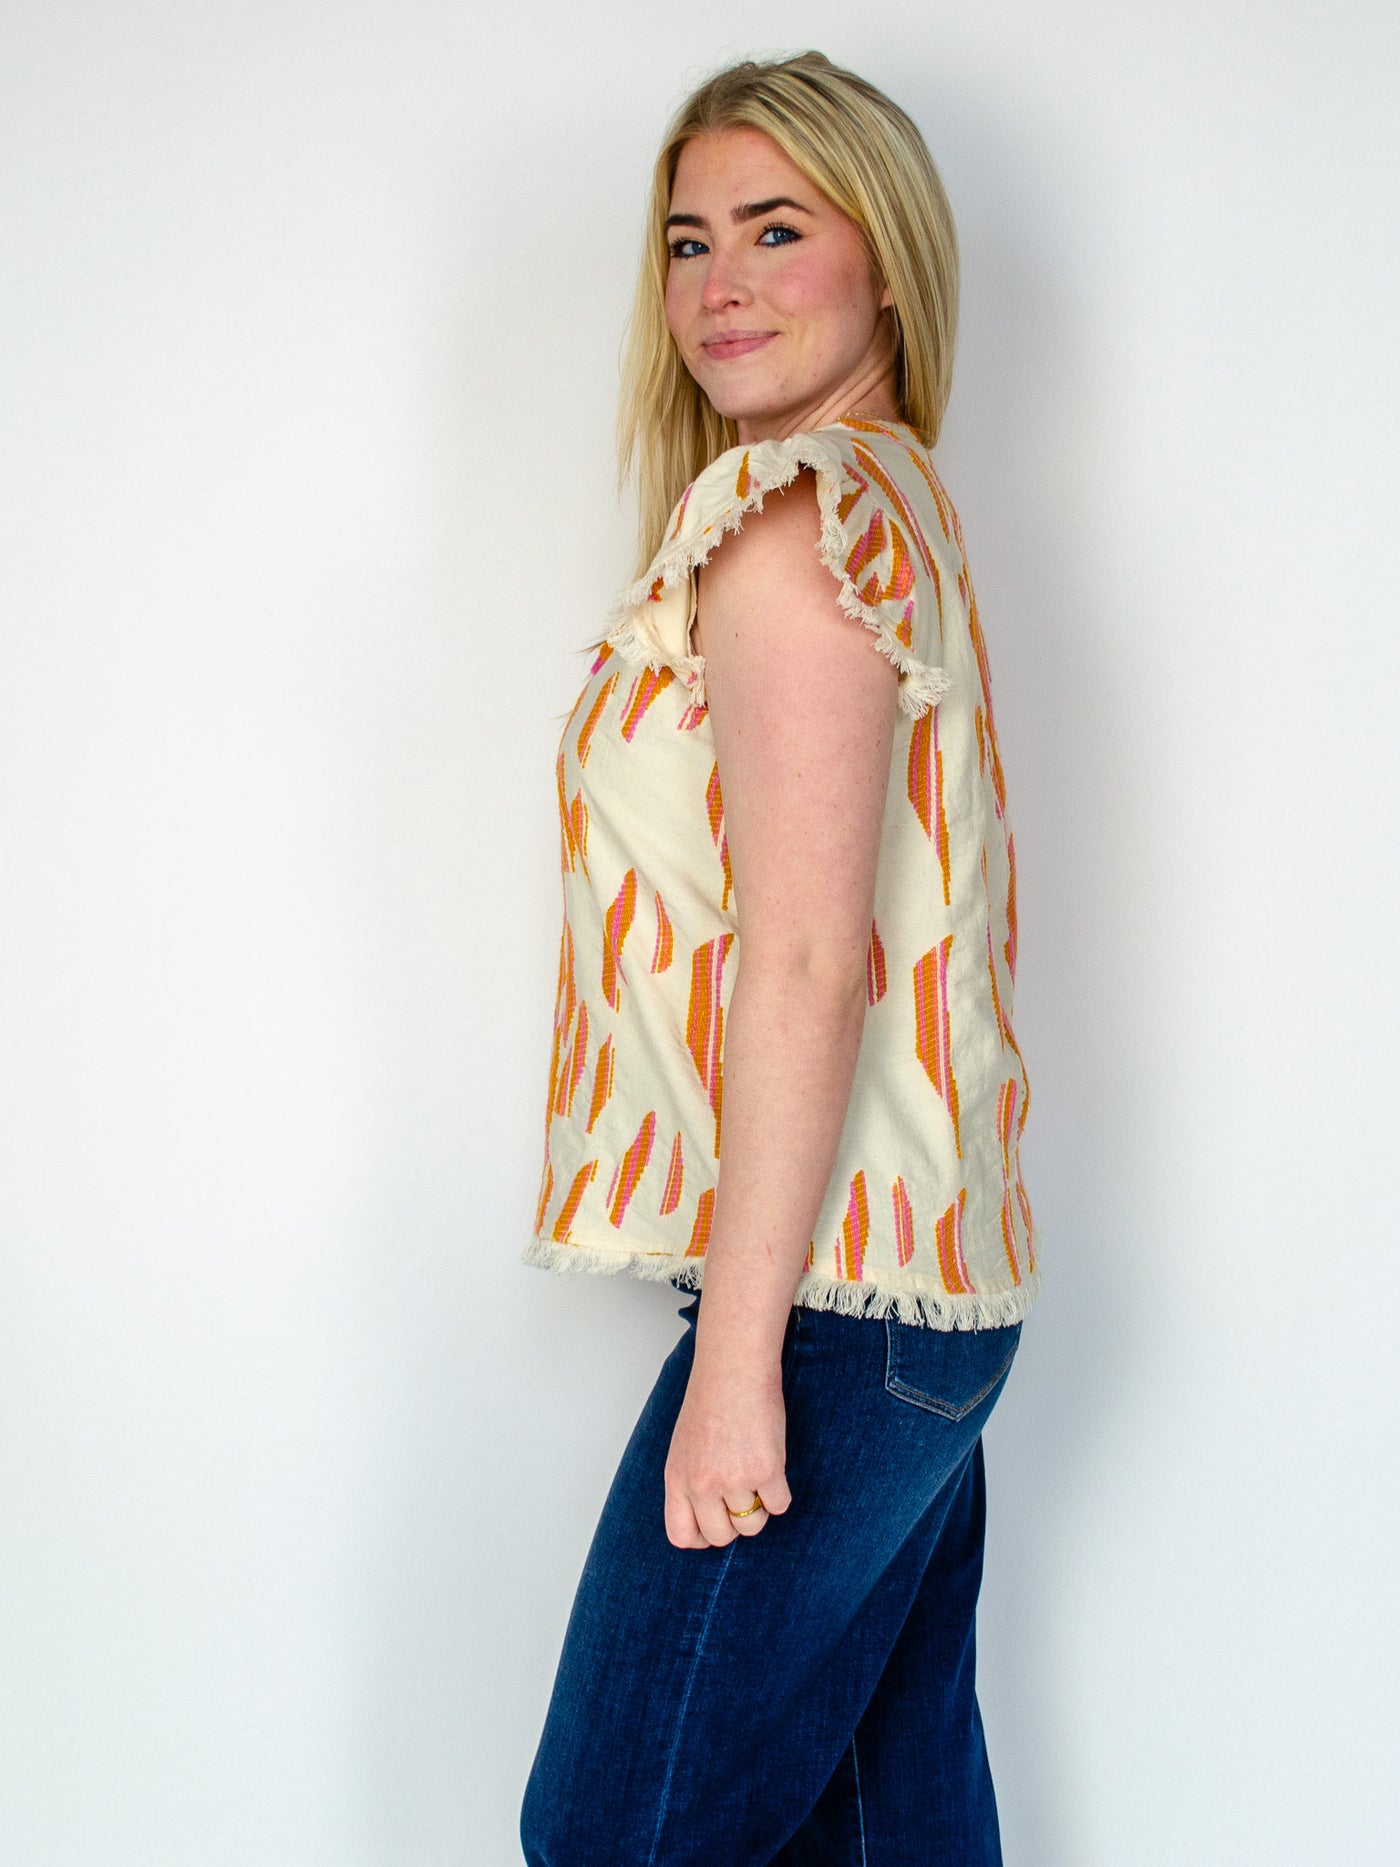 Model is wearing a feminine blouse with frayed hemming on the sleeves and abstract apricot colored detail with a white base color. The blouse is paired with blue jeans. 